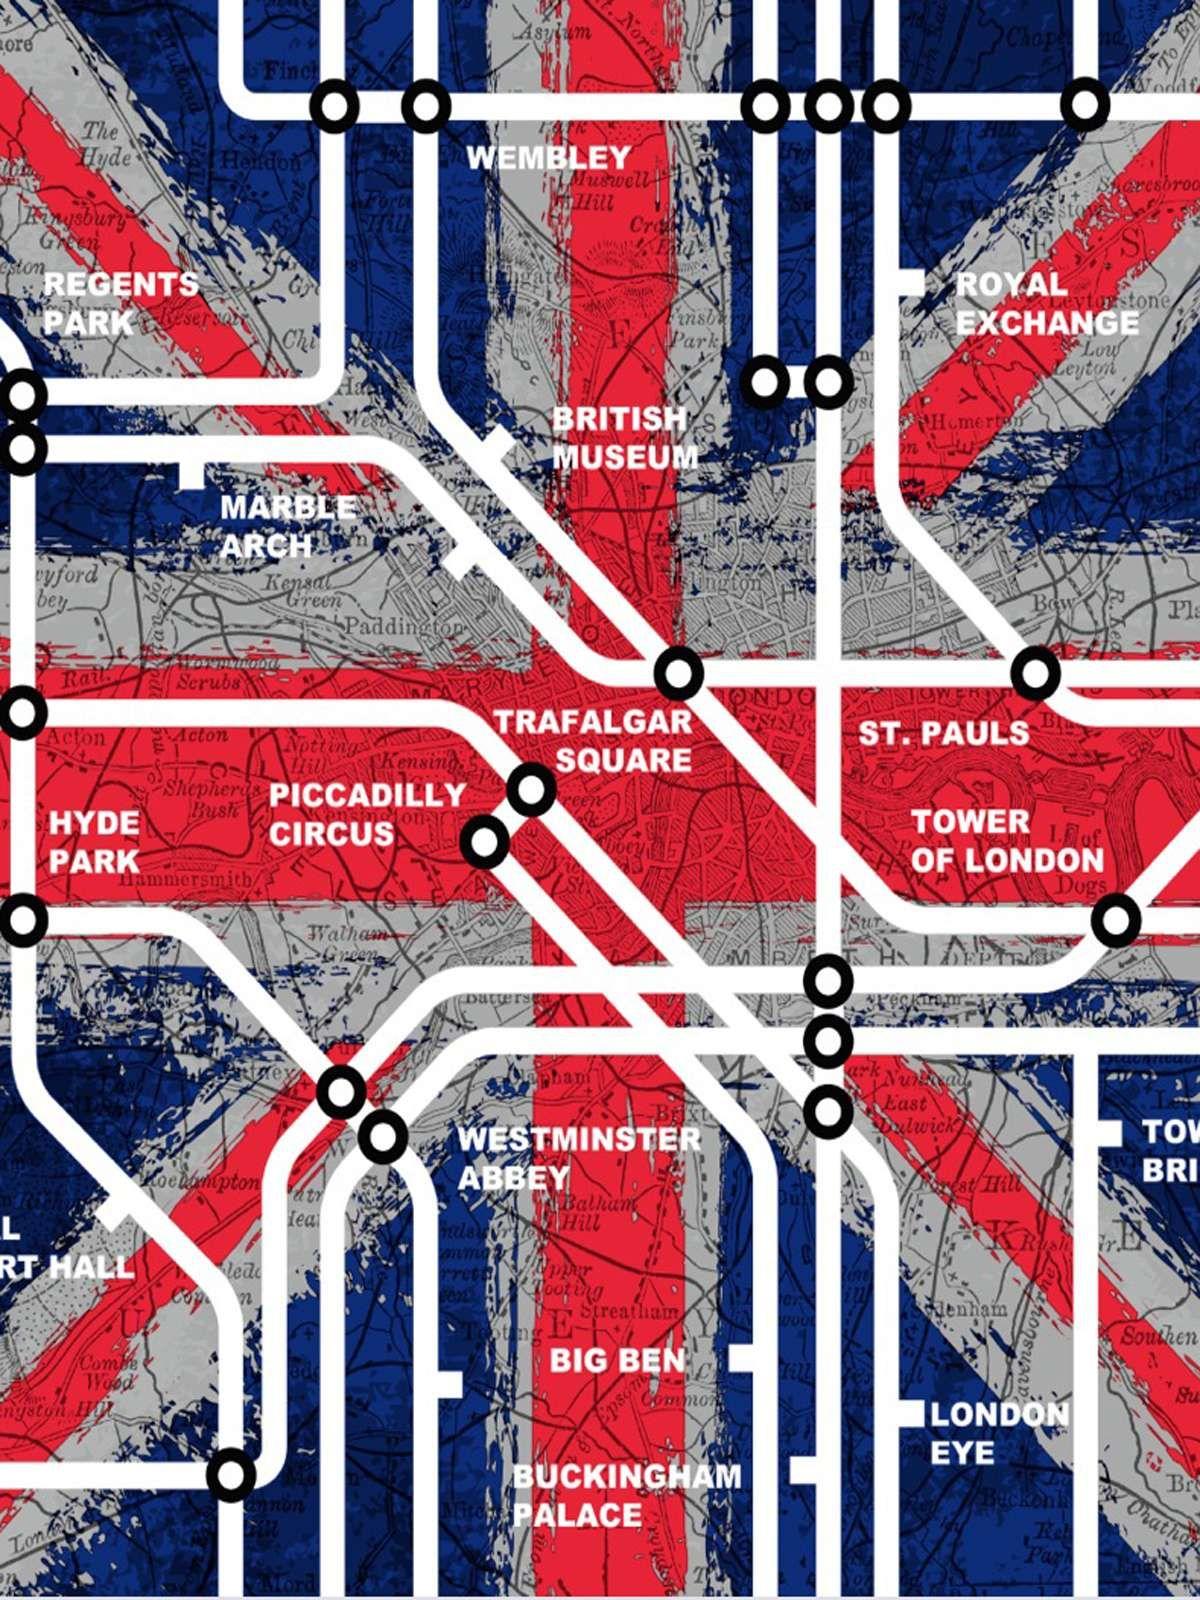 London Tube Stations Wallpaper by Muriva. Union Jack Attack